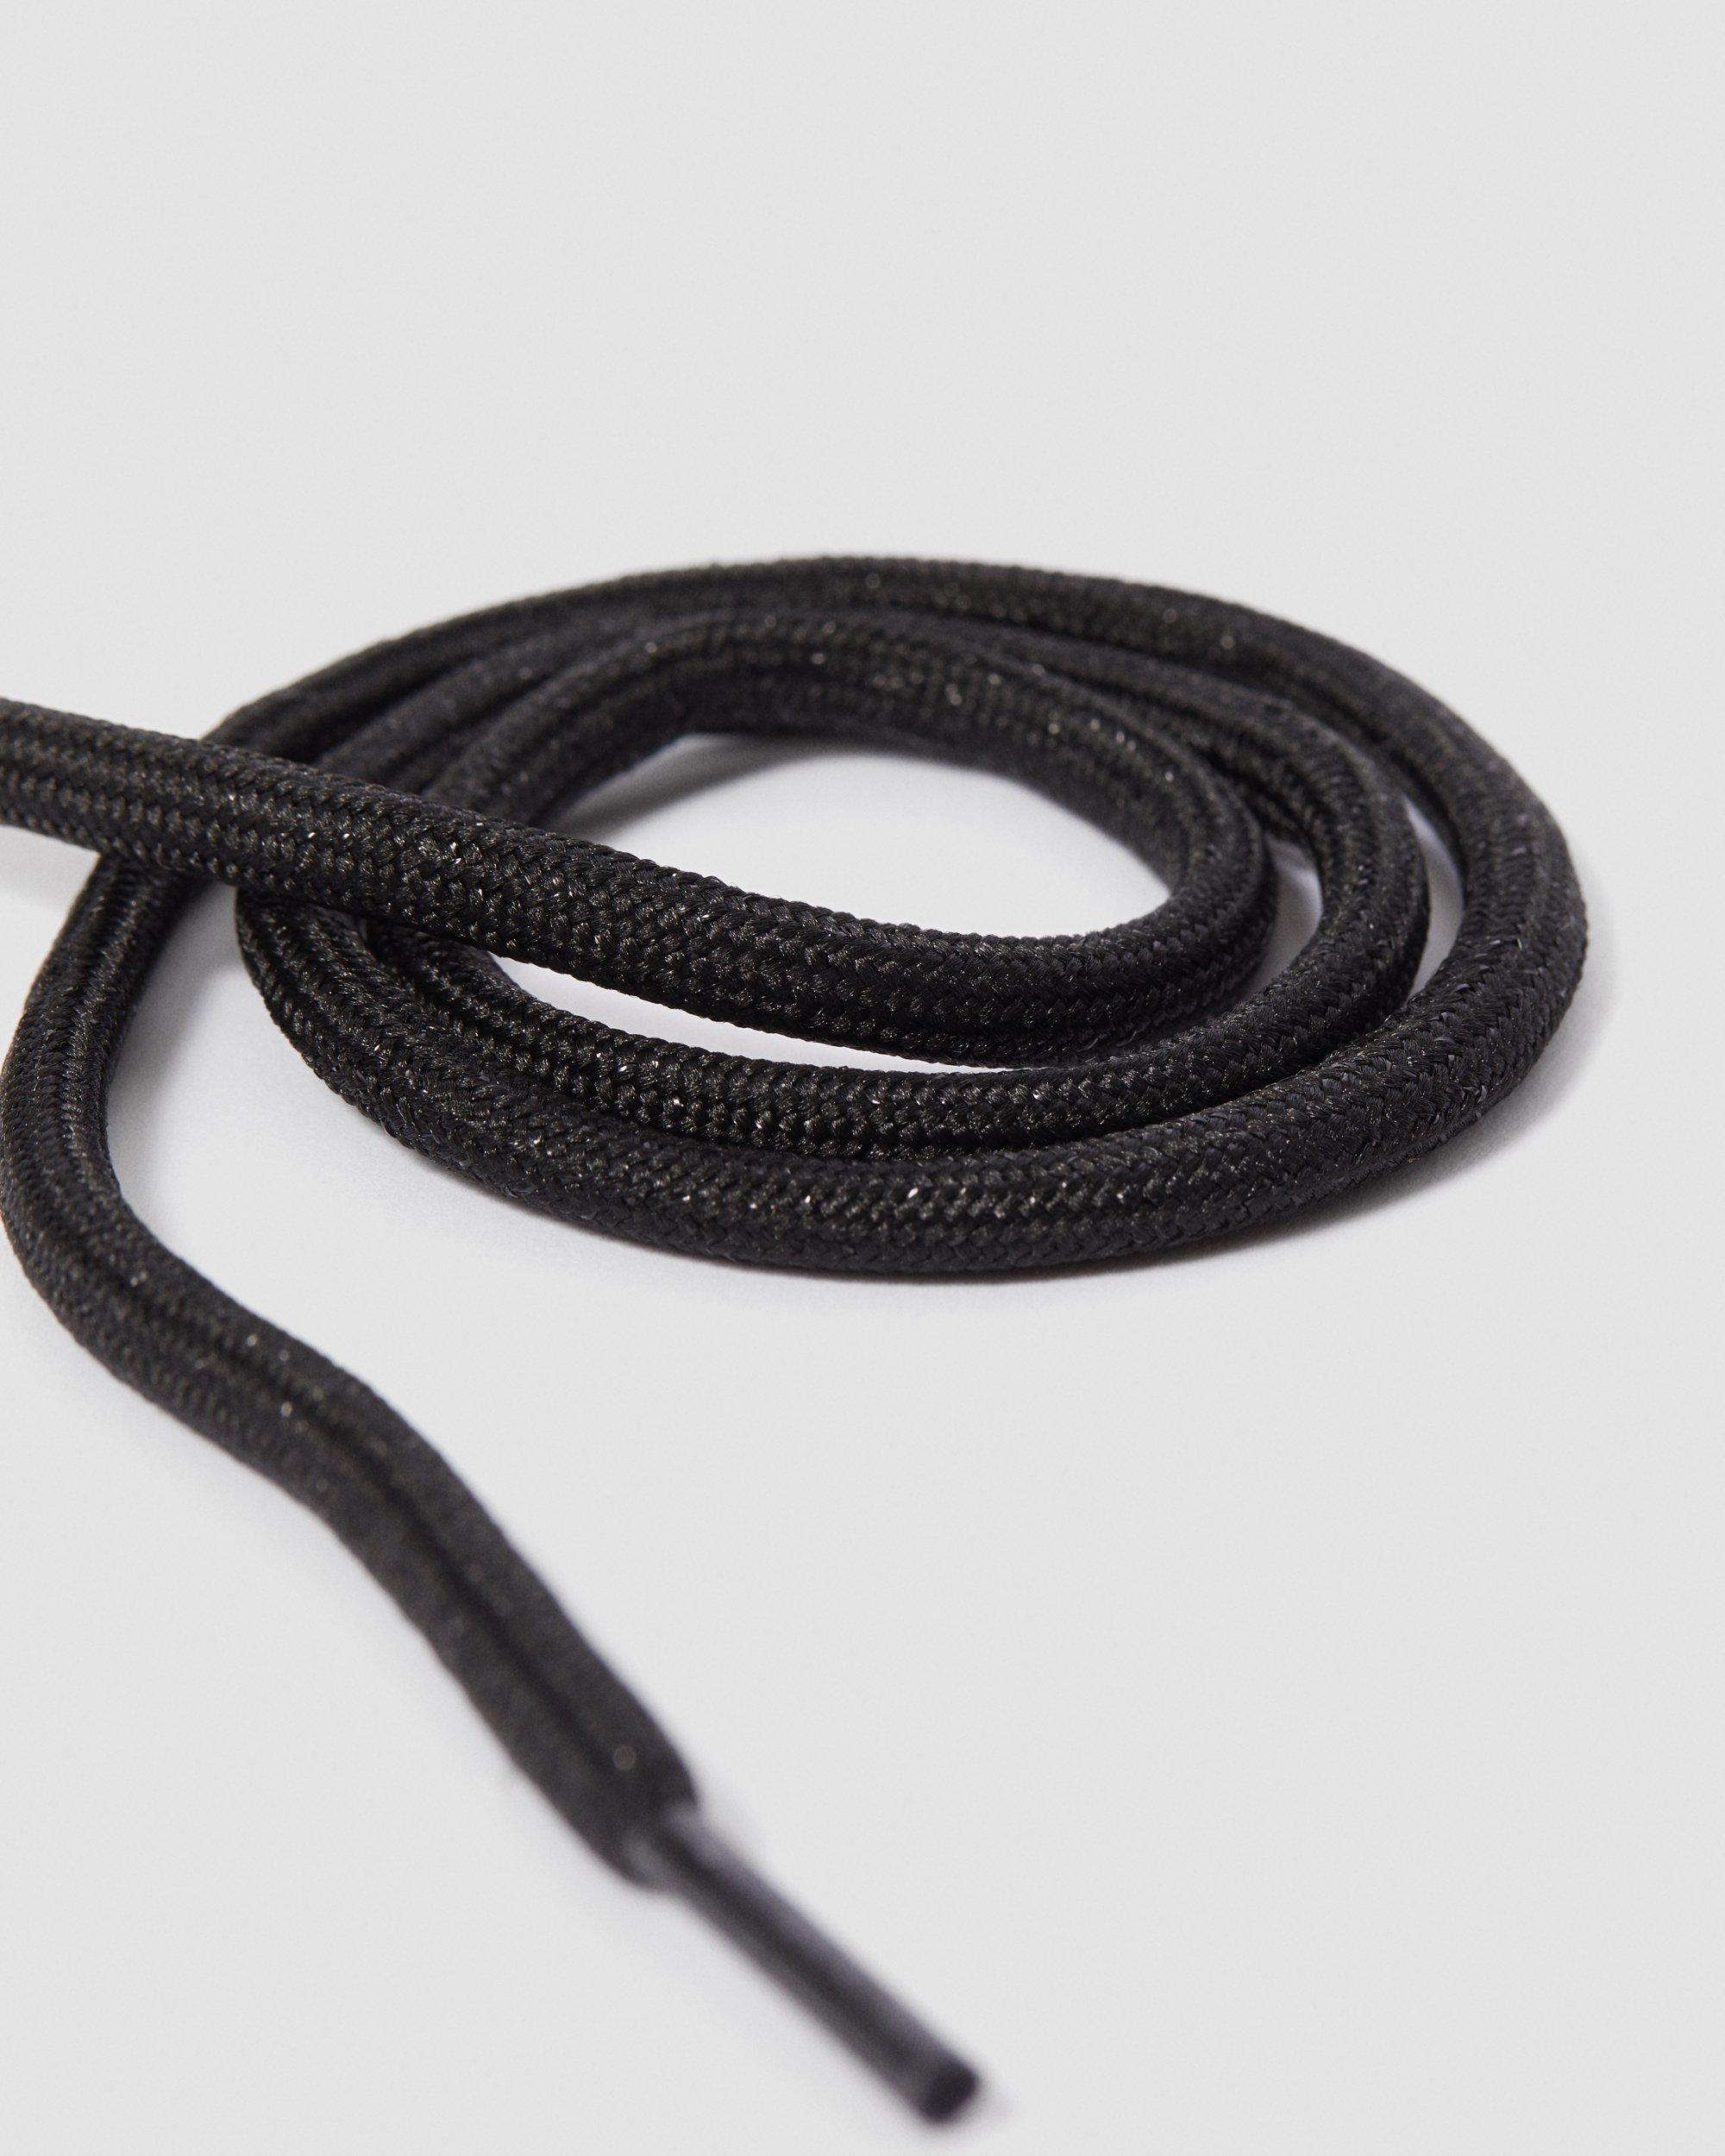 26 Inch Round Shoe Laces (3-Eye) Dr. Martens